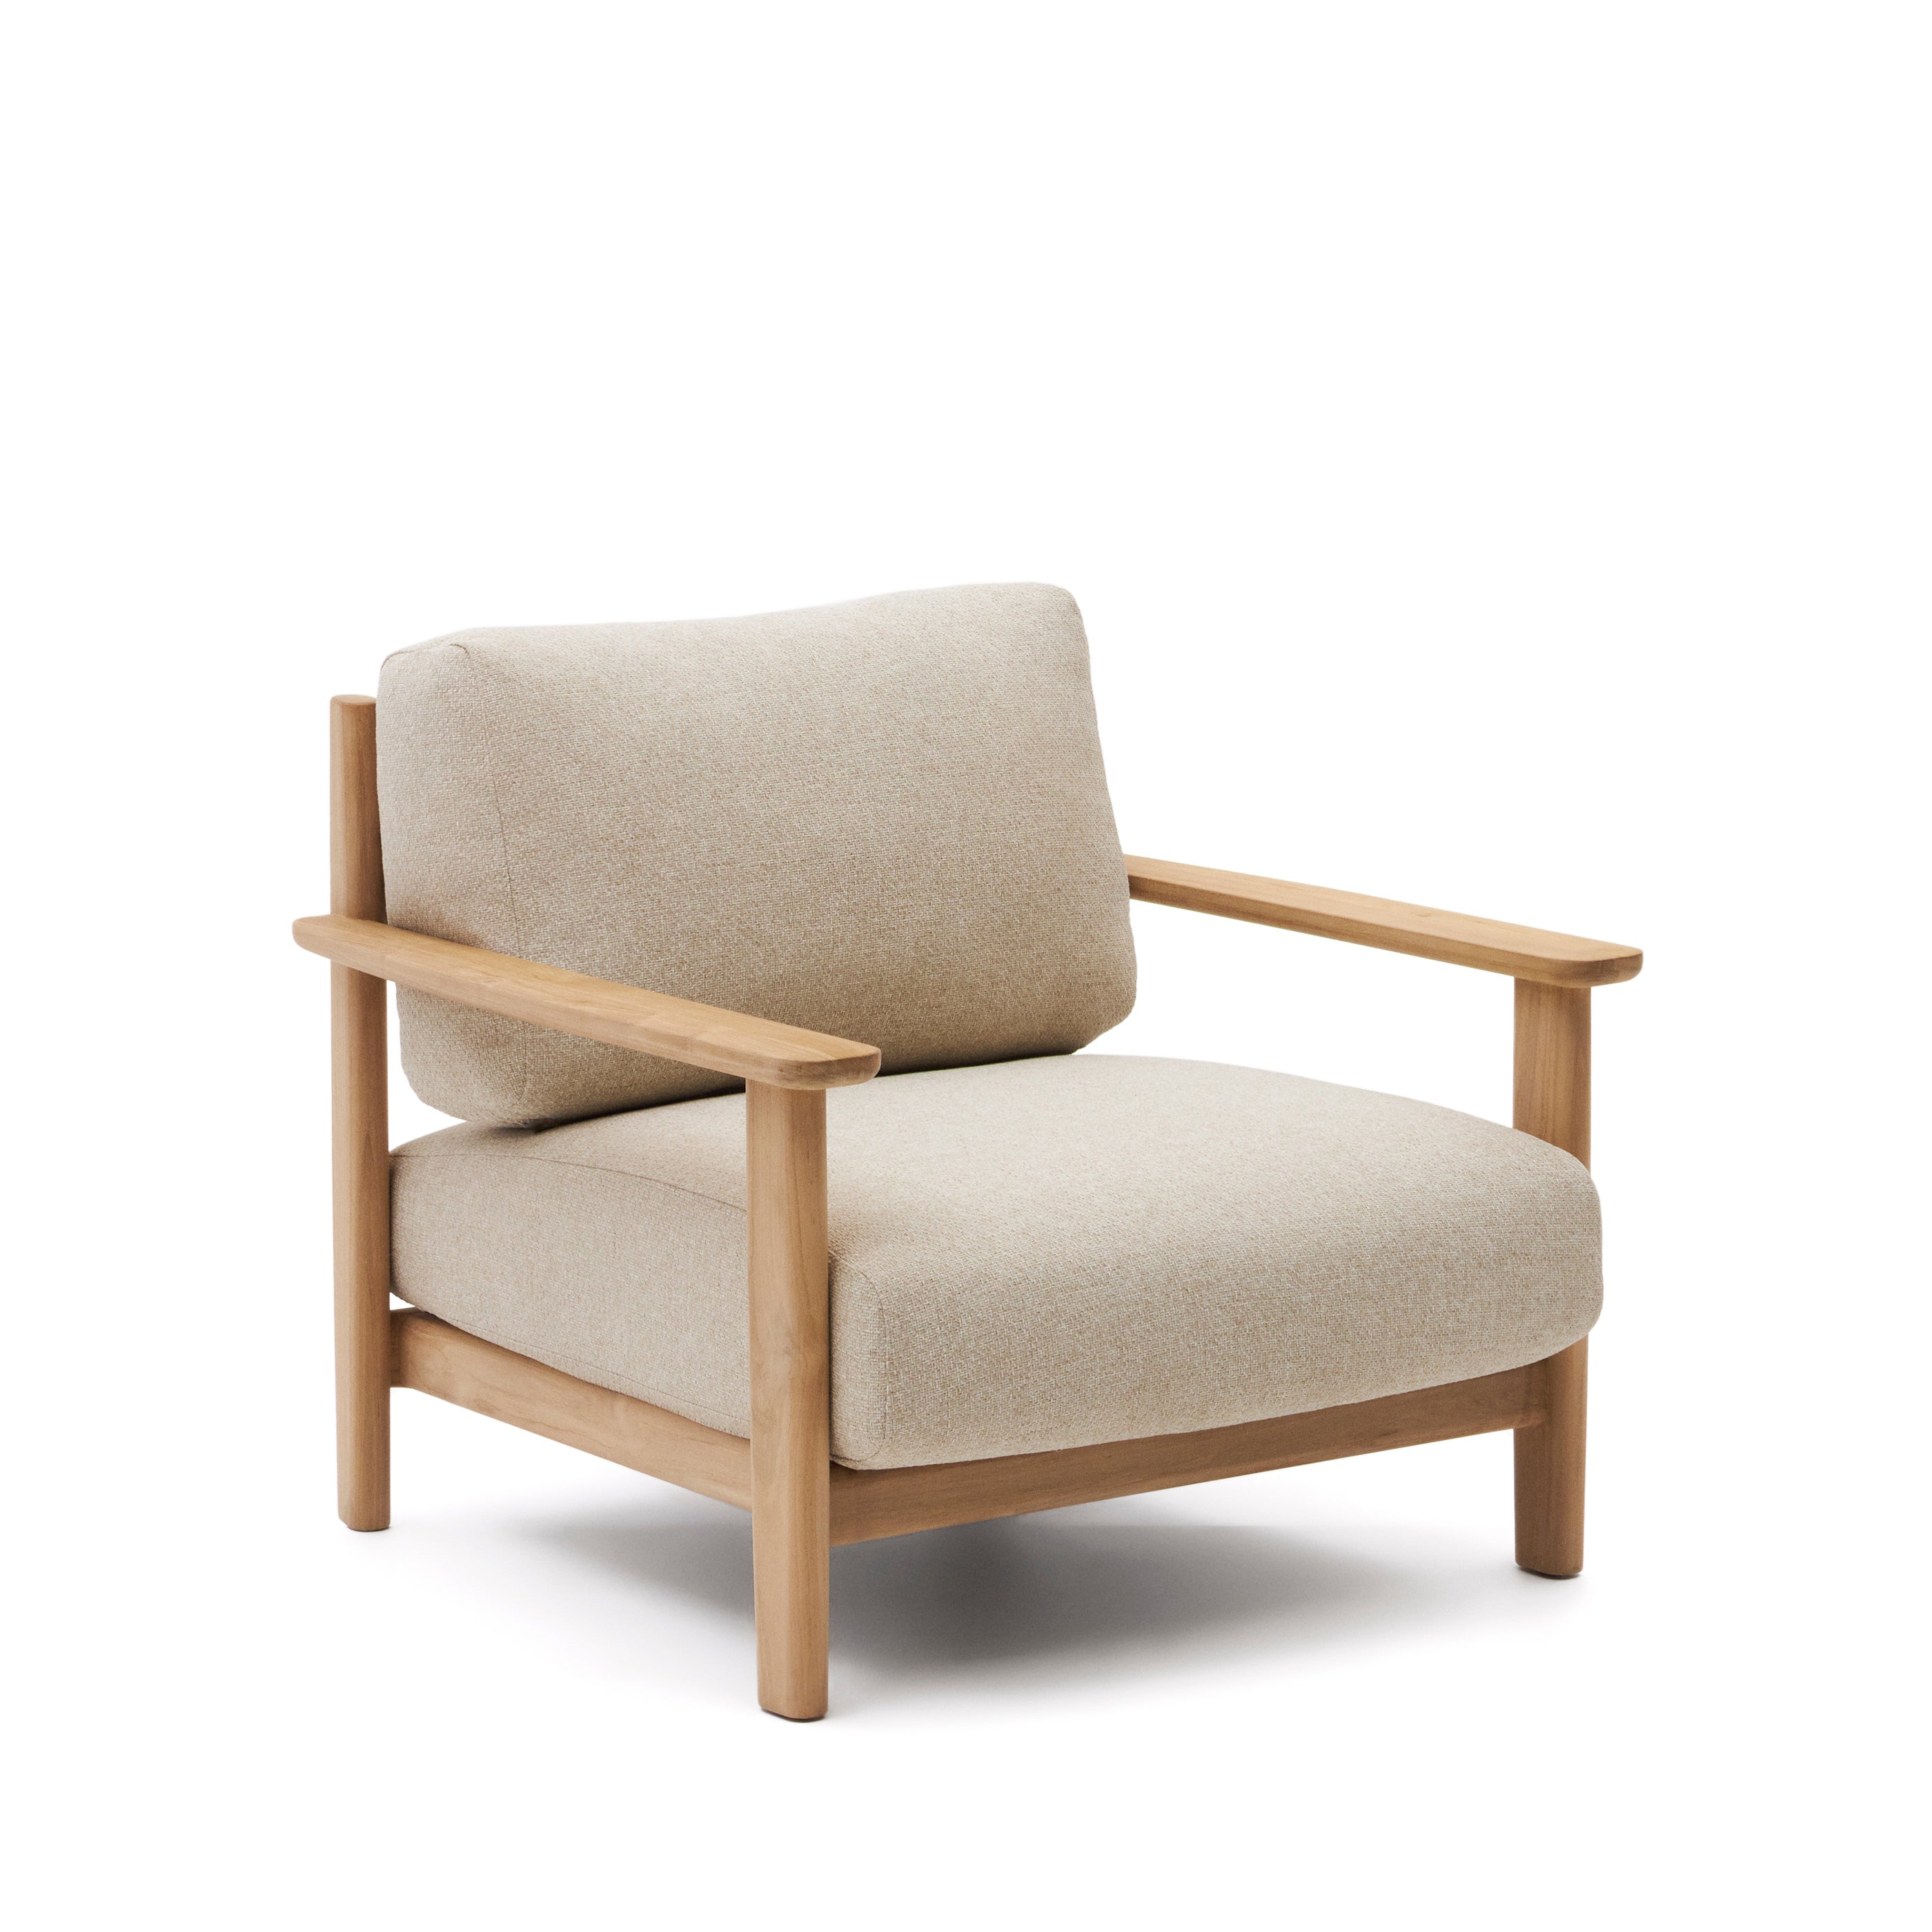 Tirant armchair, made of 100% FSC certified solid teak wood